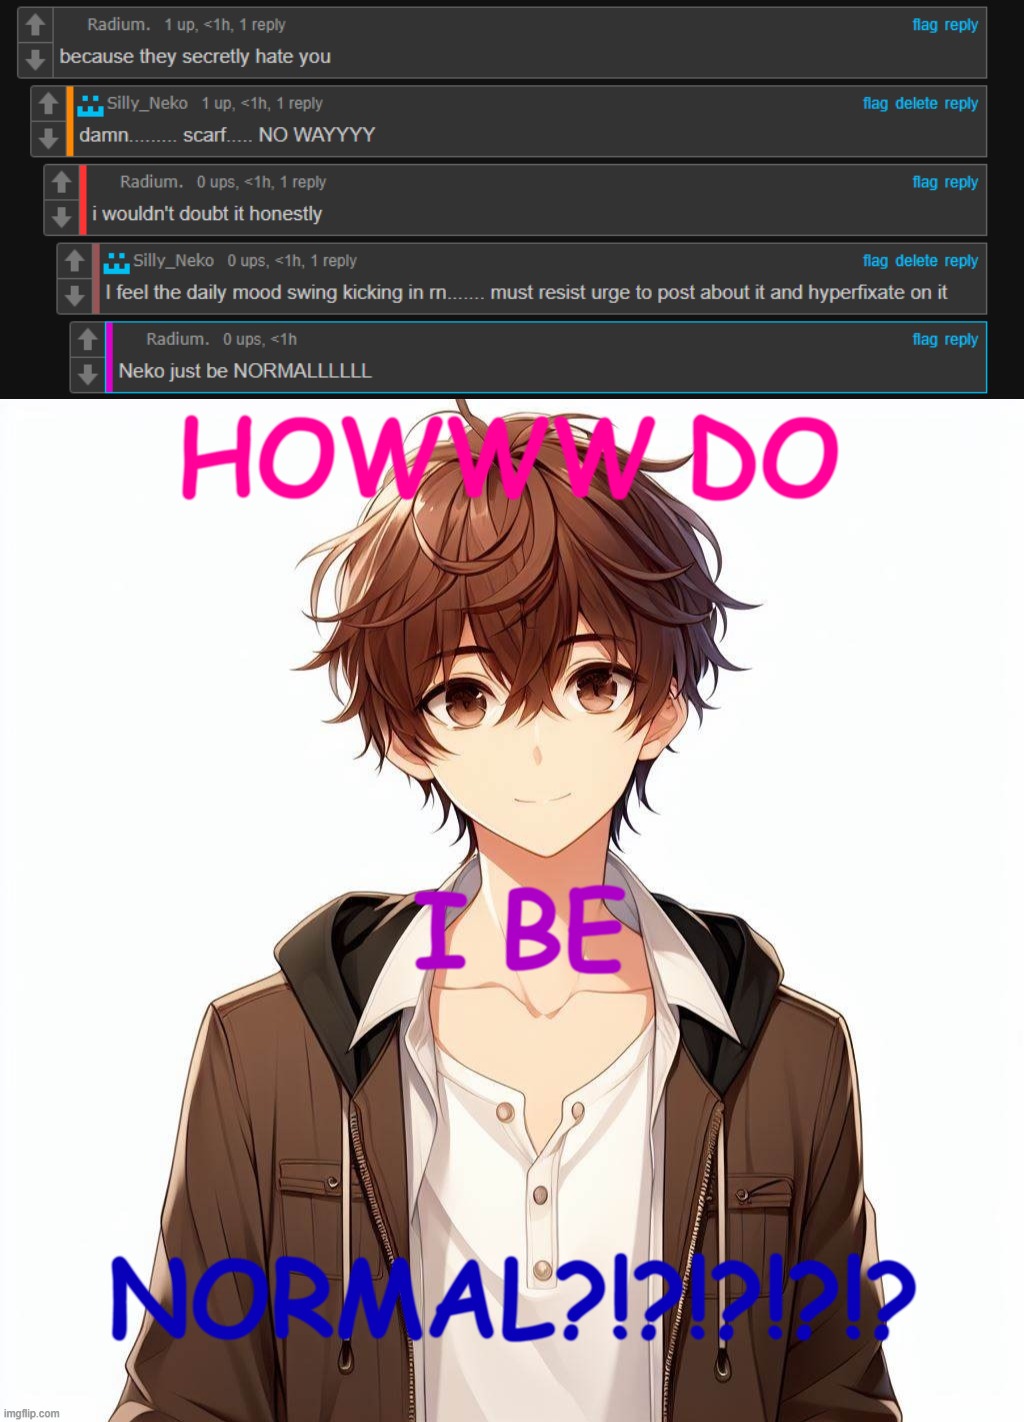 HOWWW DO; I BE; NORMAL?!?!?!?!? | image tagged in silly_neko according to ai | made w/ Imgflip meme maker